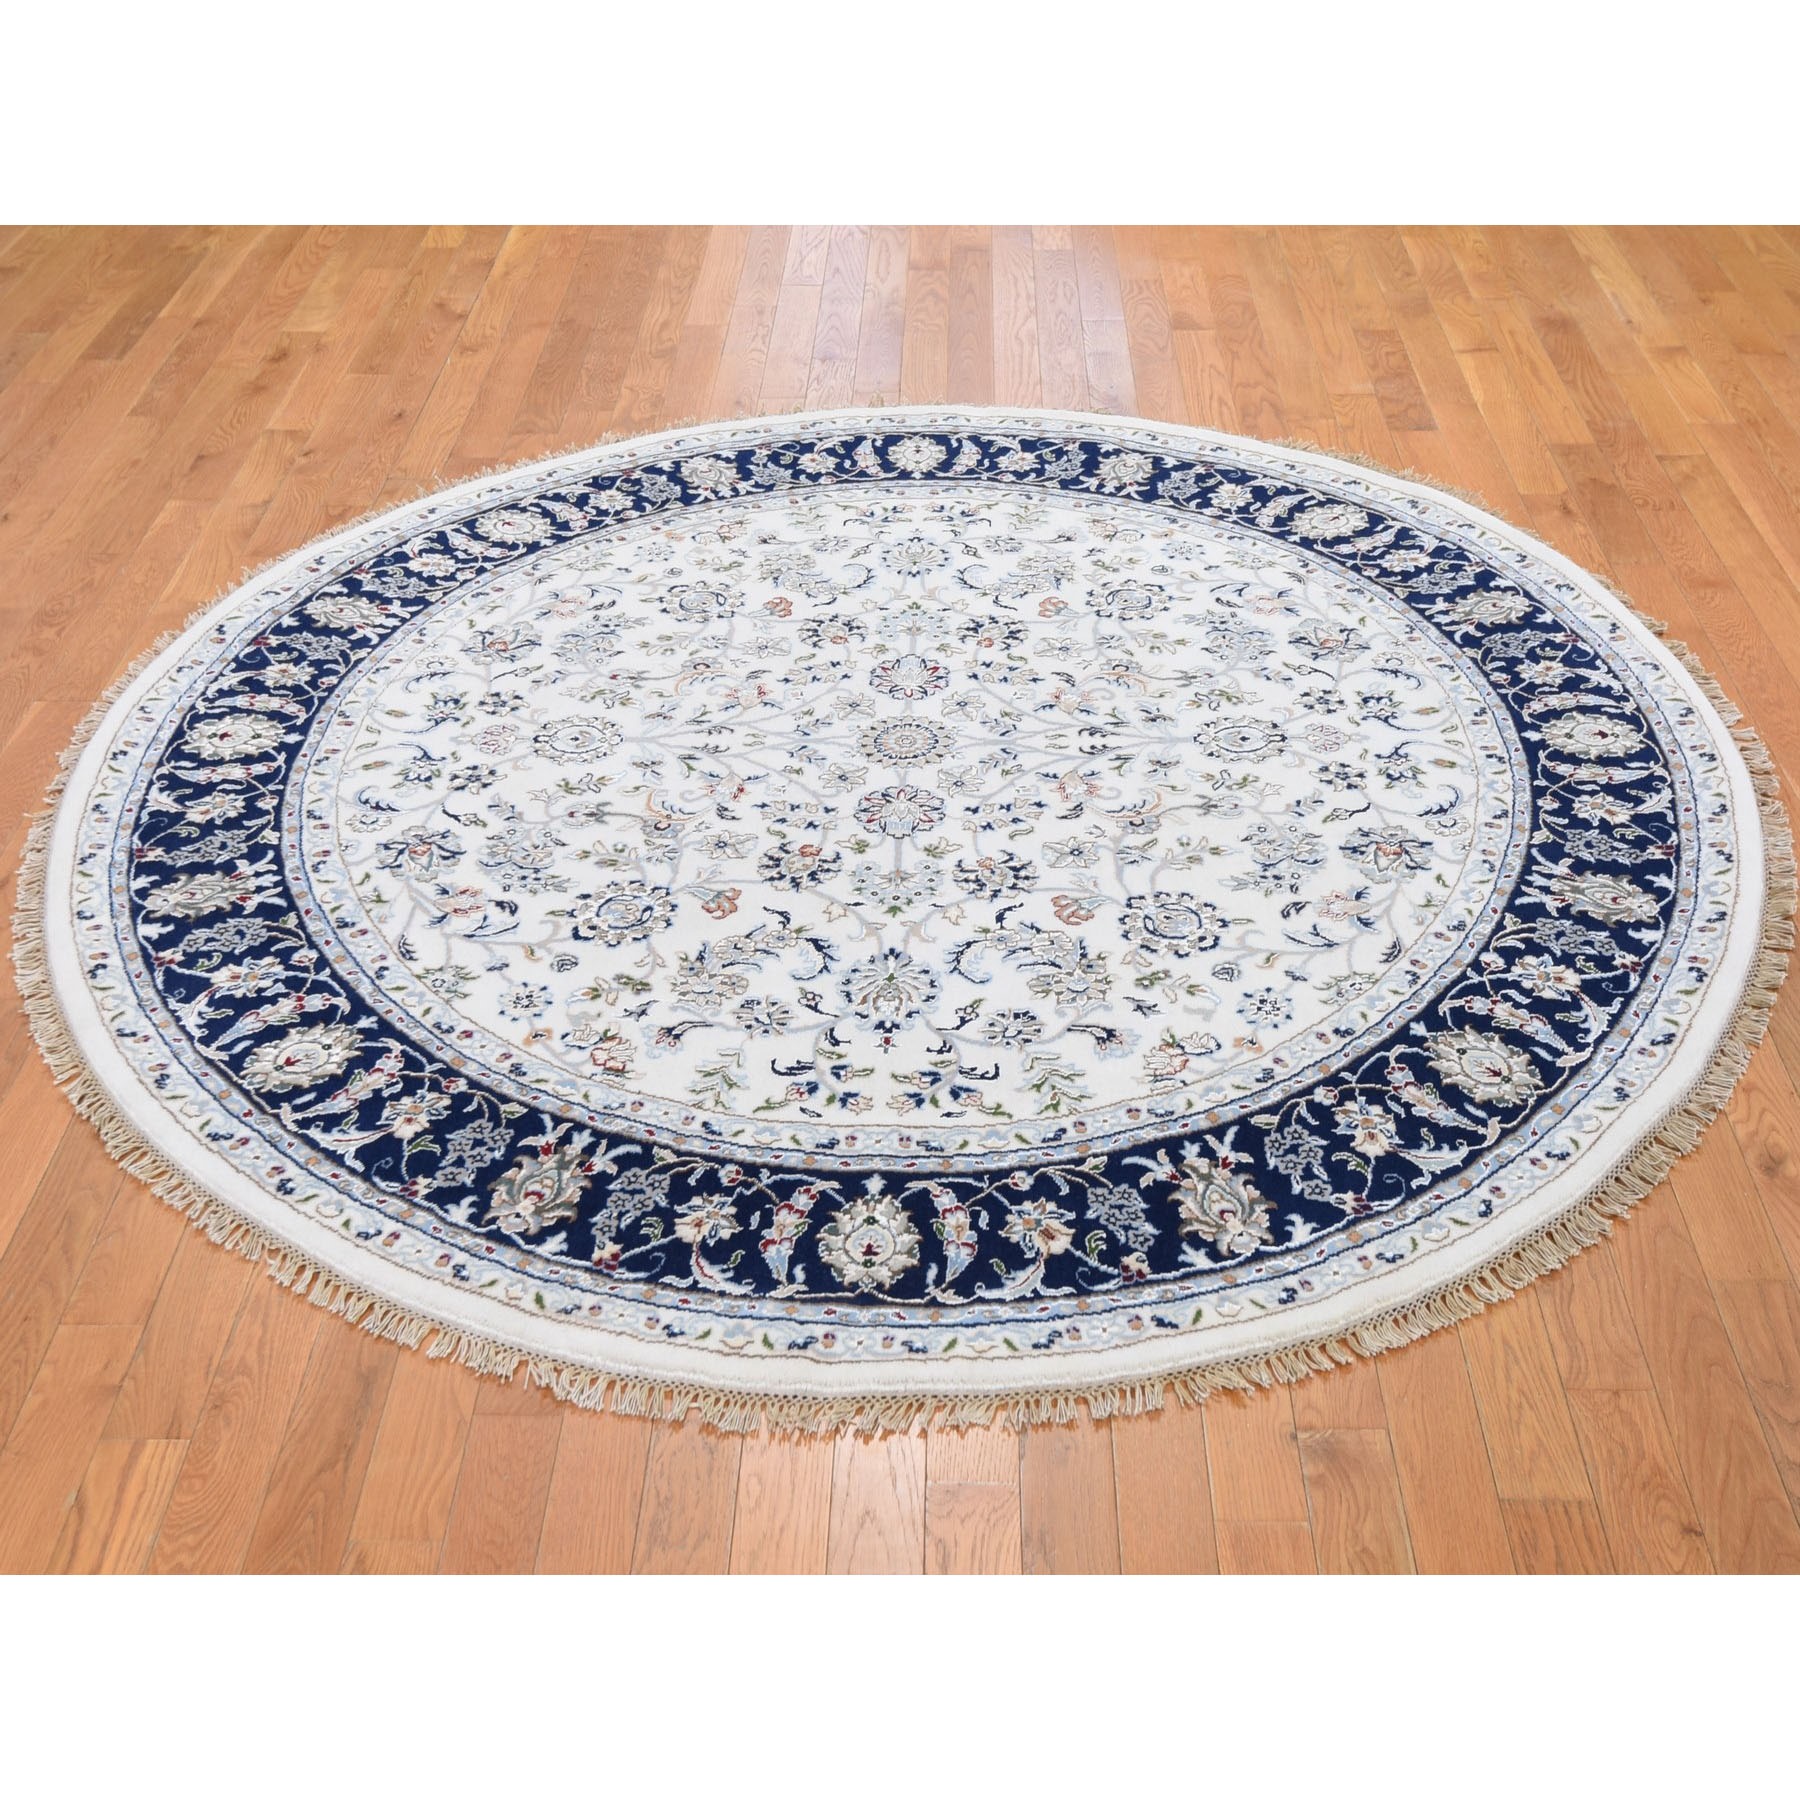 7-1 x7-1  Ivory Nain Wool And Silk 250 KPSI All Over Design Hand Knotted Round Oriental Rug 